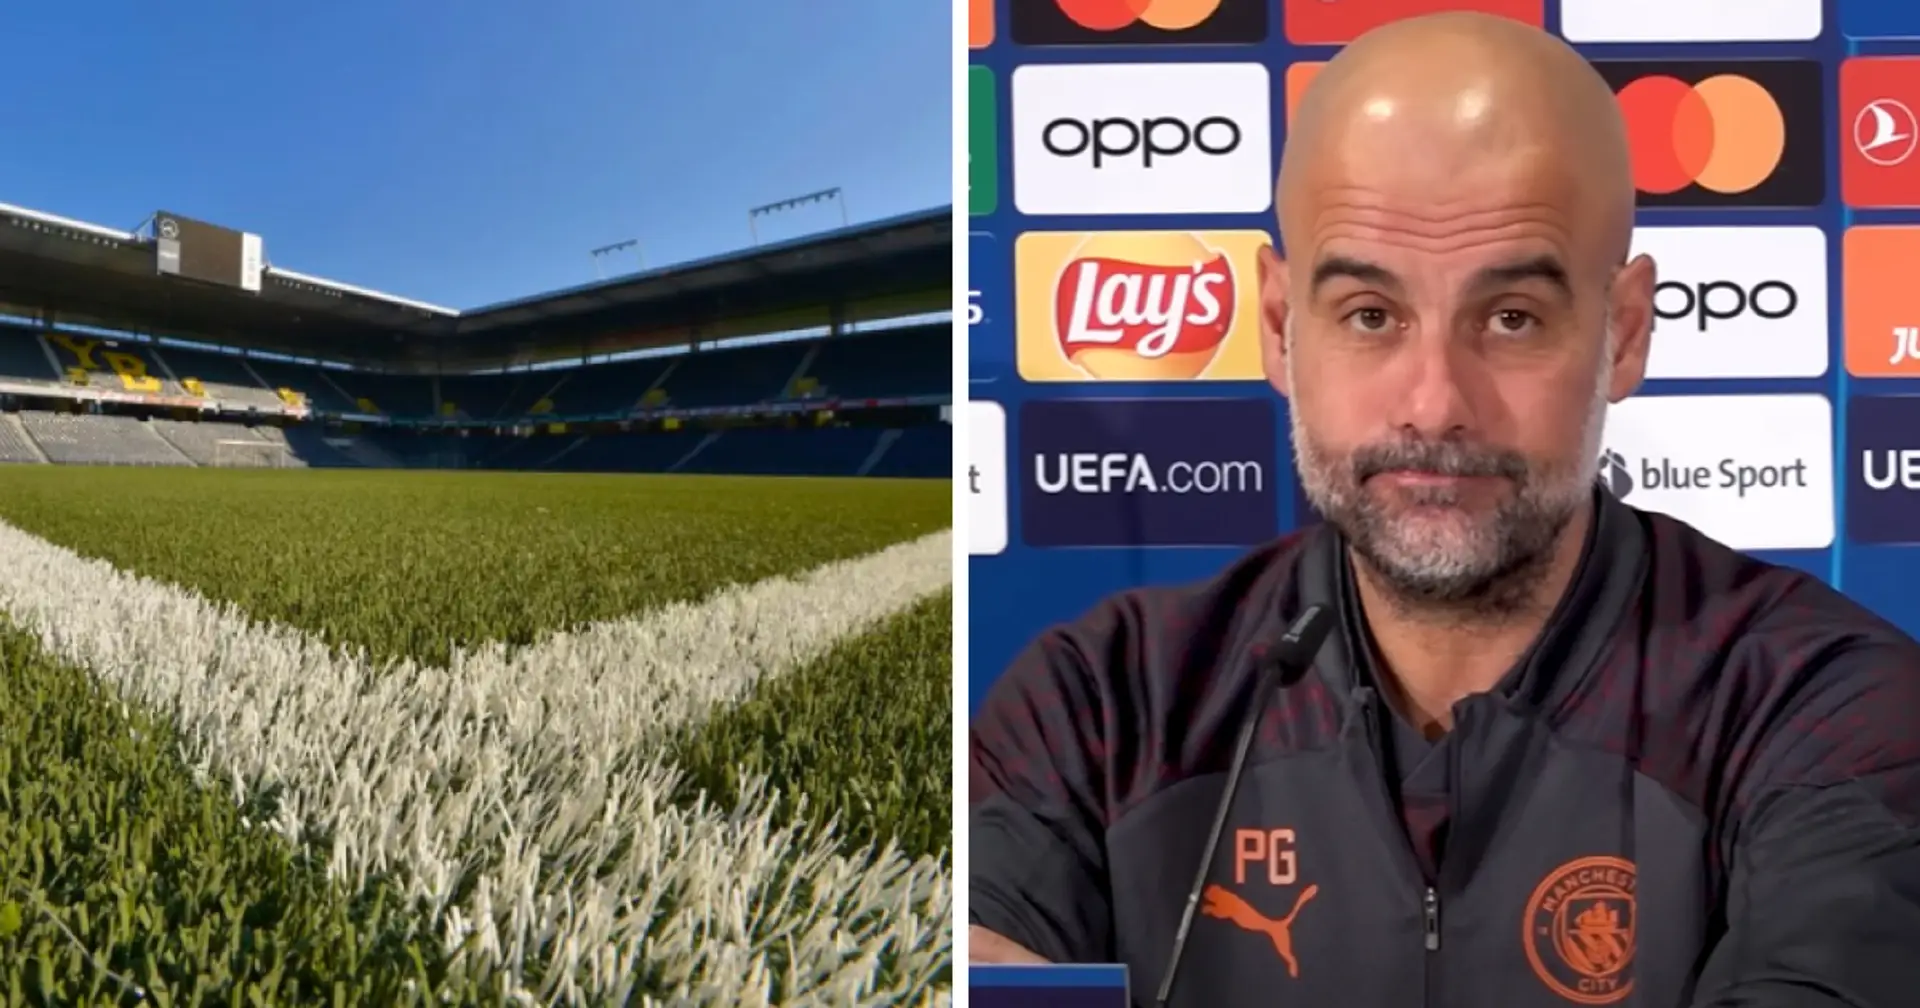 'Teams that come here have to adapt': Pep Guardiola about playing on Young Boys' plastic pitch